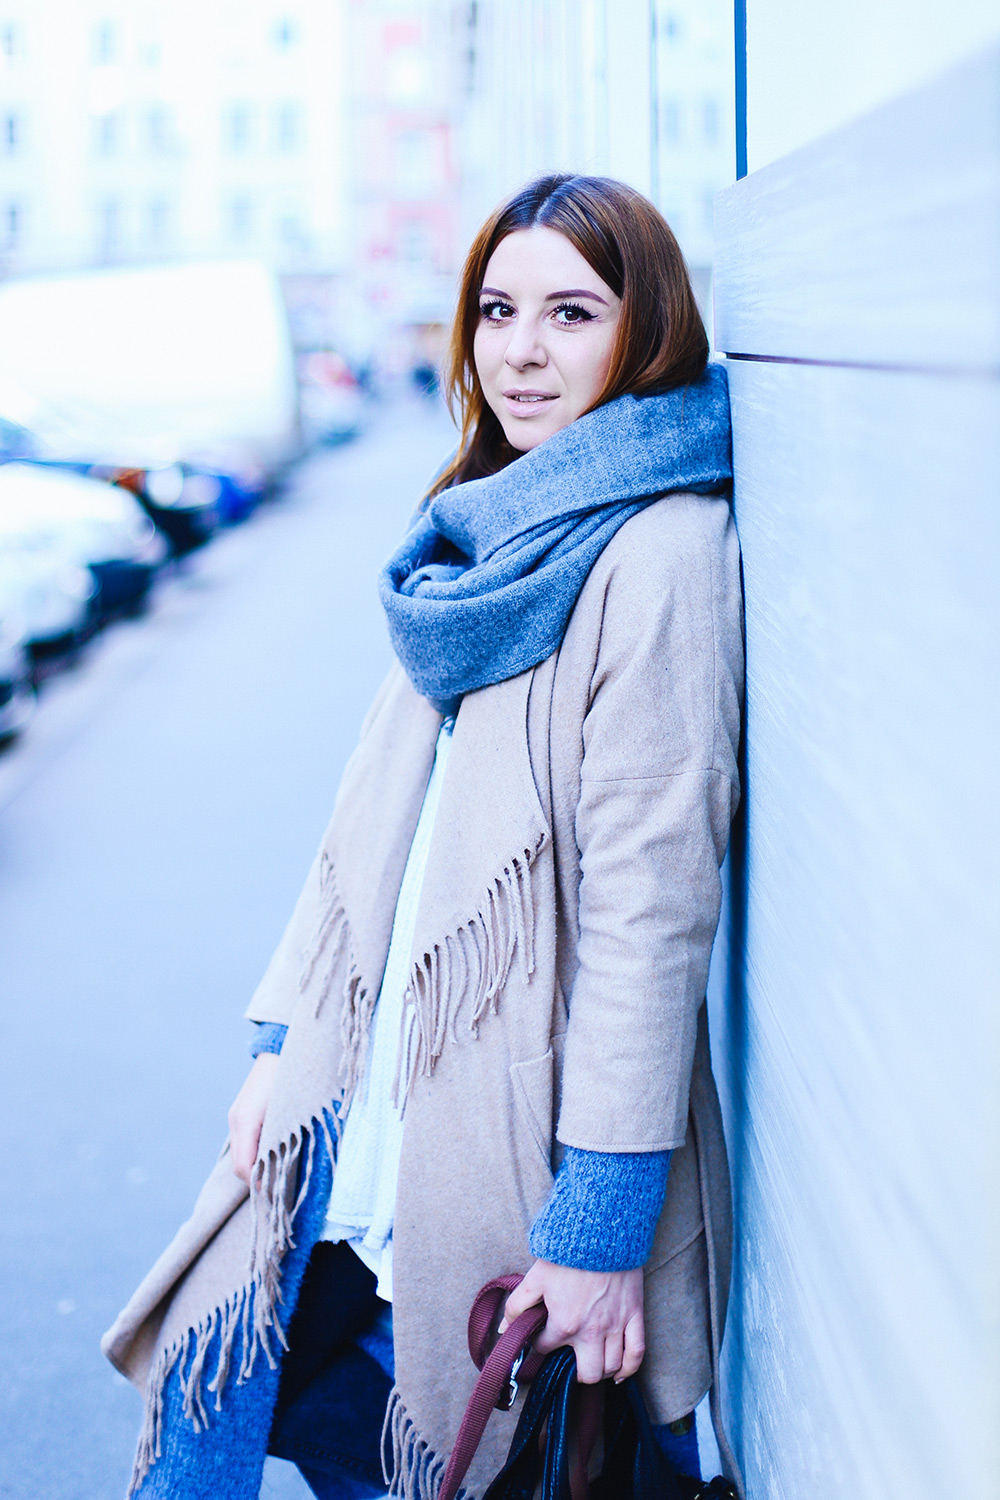 who is mocca, modeblogger, fashionblogger, influencer, wie geht layering?, lagenlook, zwiebellook, c&a boots, winteroutfit, asos fransenjacke, streetstyle, innsbruck, frenchie, fawn, whoismocca.com